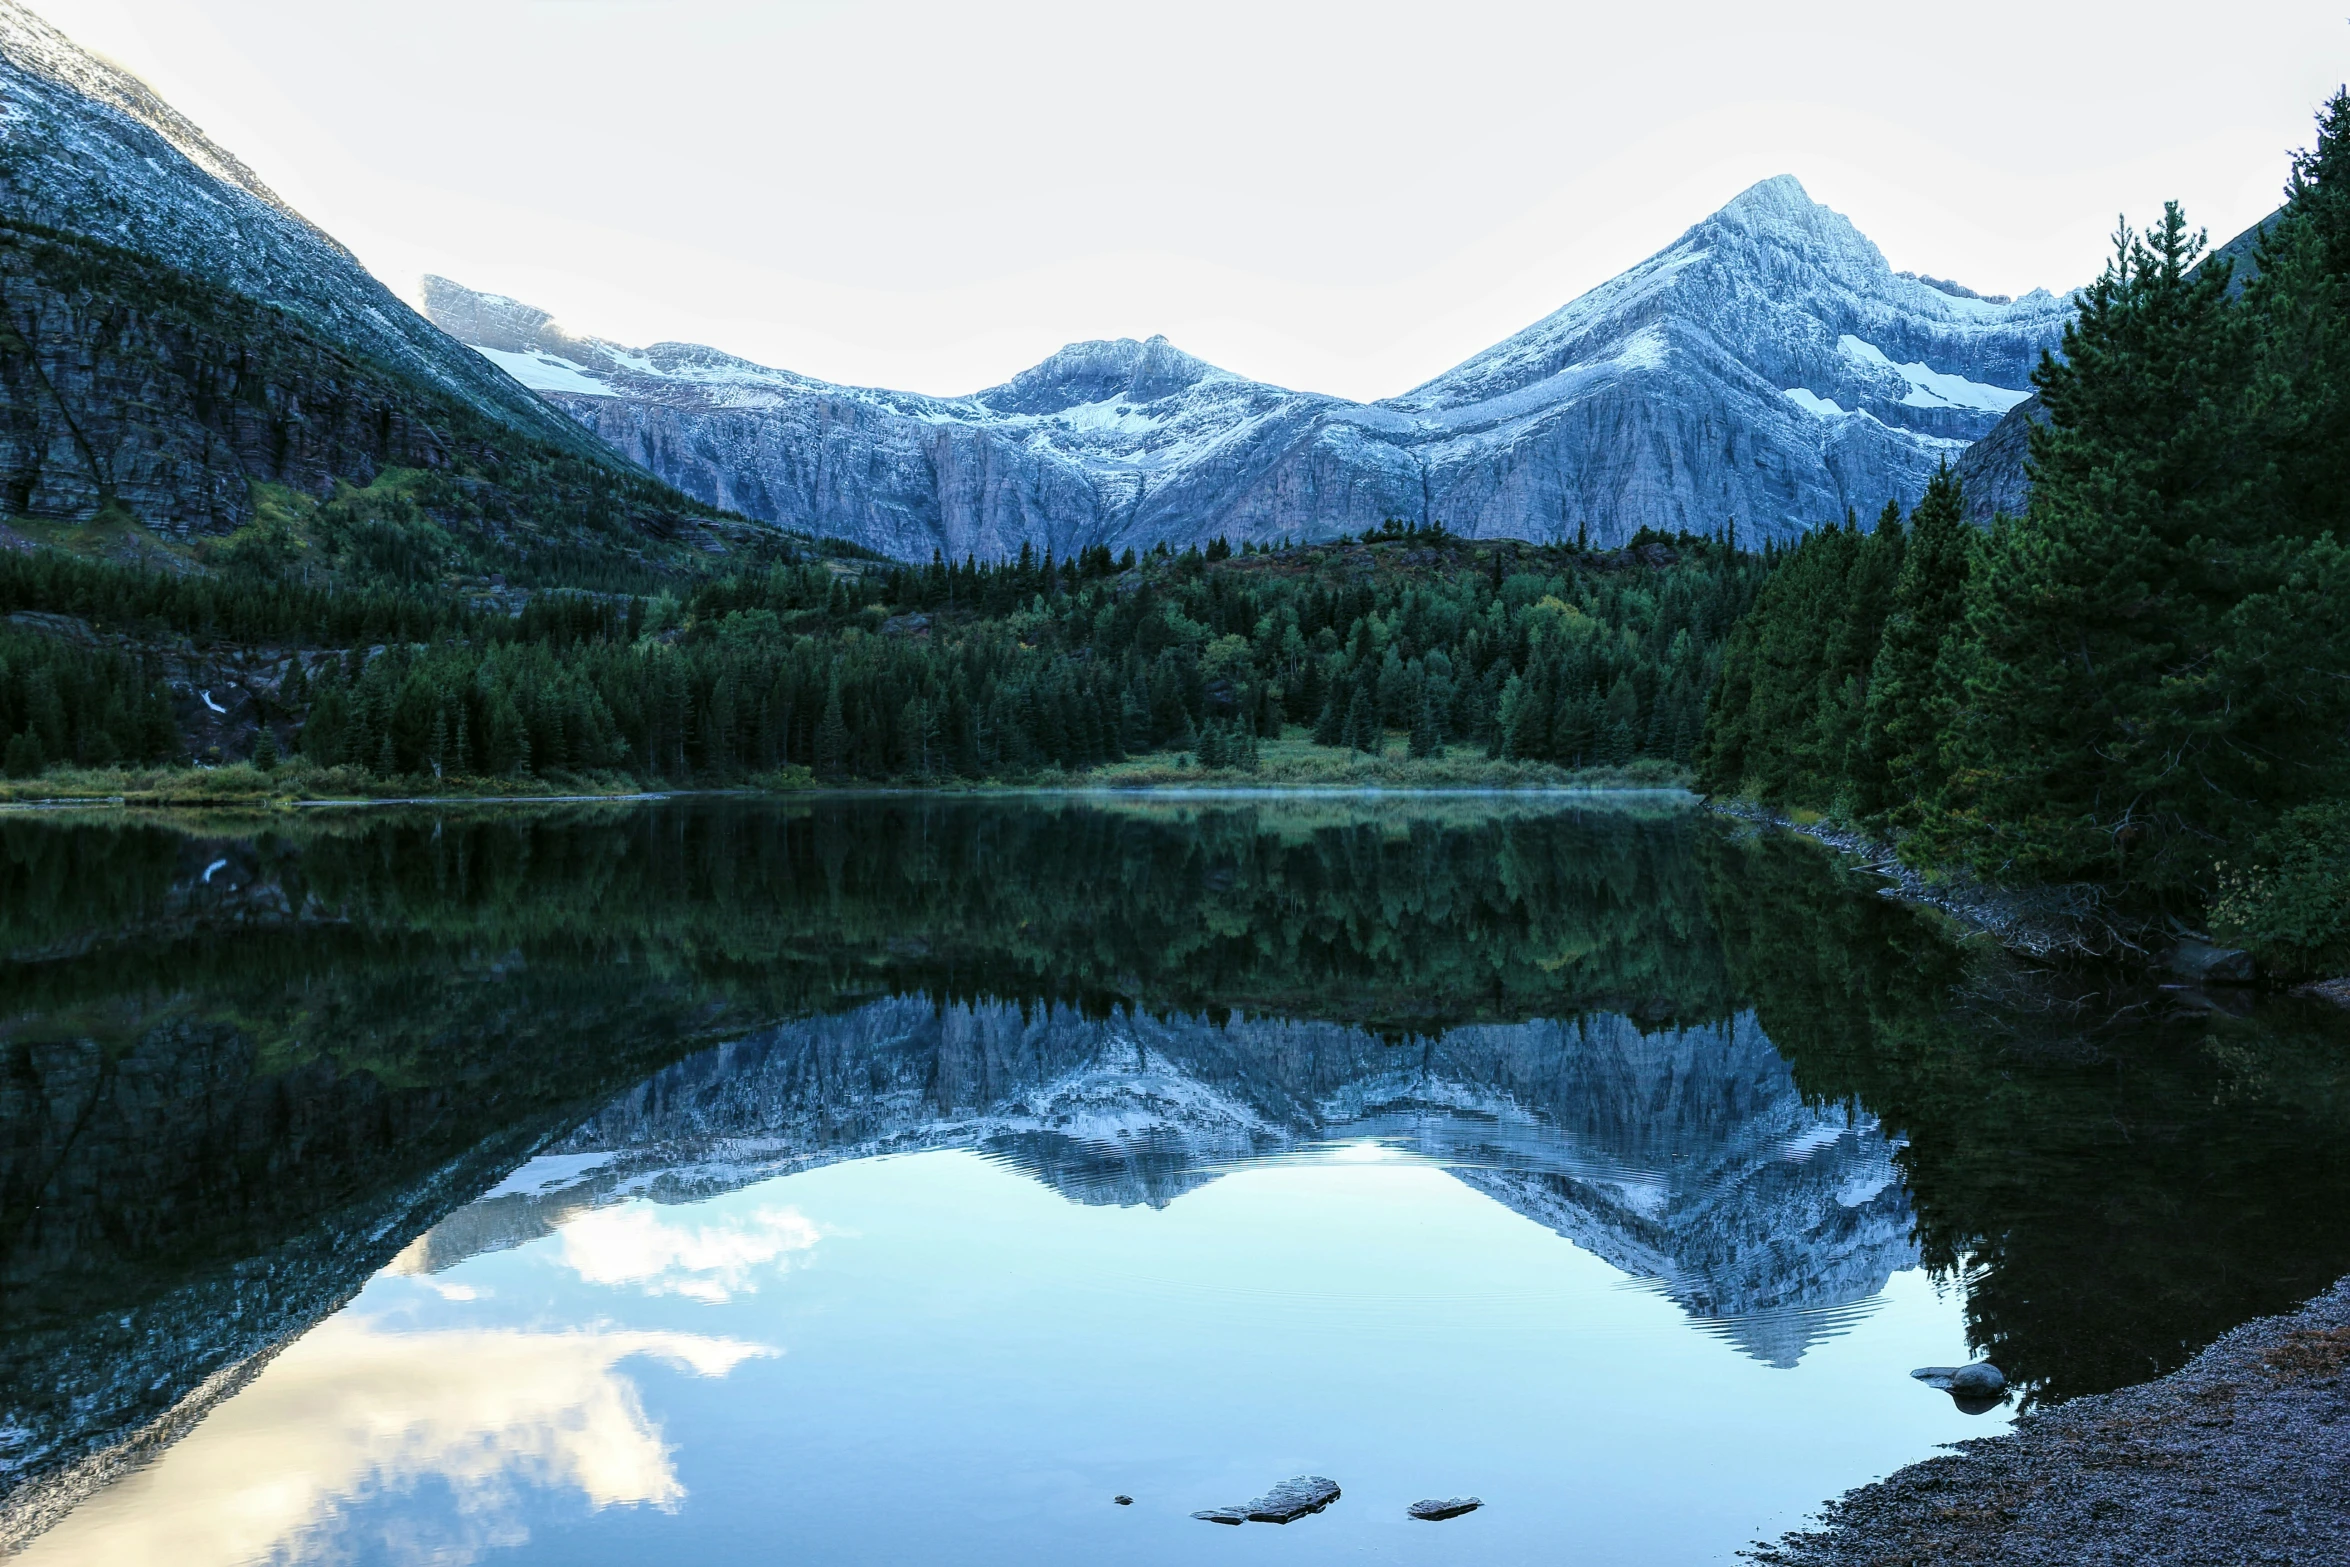 the mountains are shown reflected in a still lake